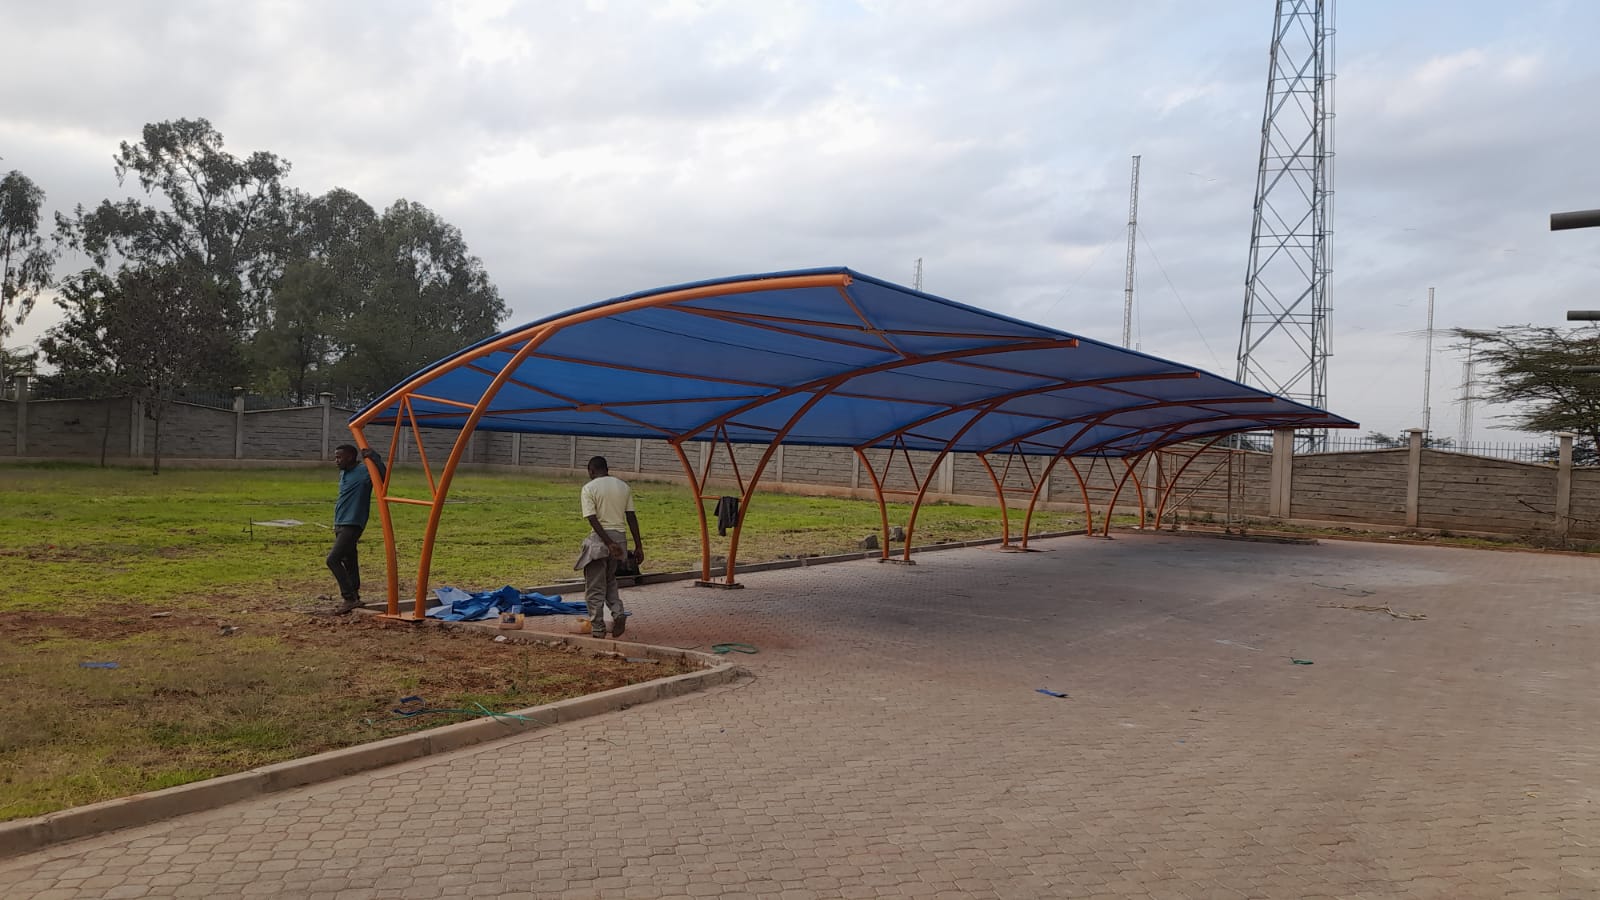 Car Port-Parking Shade for Commercial and Residential Areas-Cantilever Canopy-Curved Car Shade-Waterproof Shade-Sun shade-Vehicle parking cover-Garage Shade-Car Park Tent for Schools, Offices, Churches, Airports, Factories, Companies, University, Hospitals, Colleges, Government Institutions, Military and Arm Bases